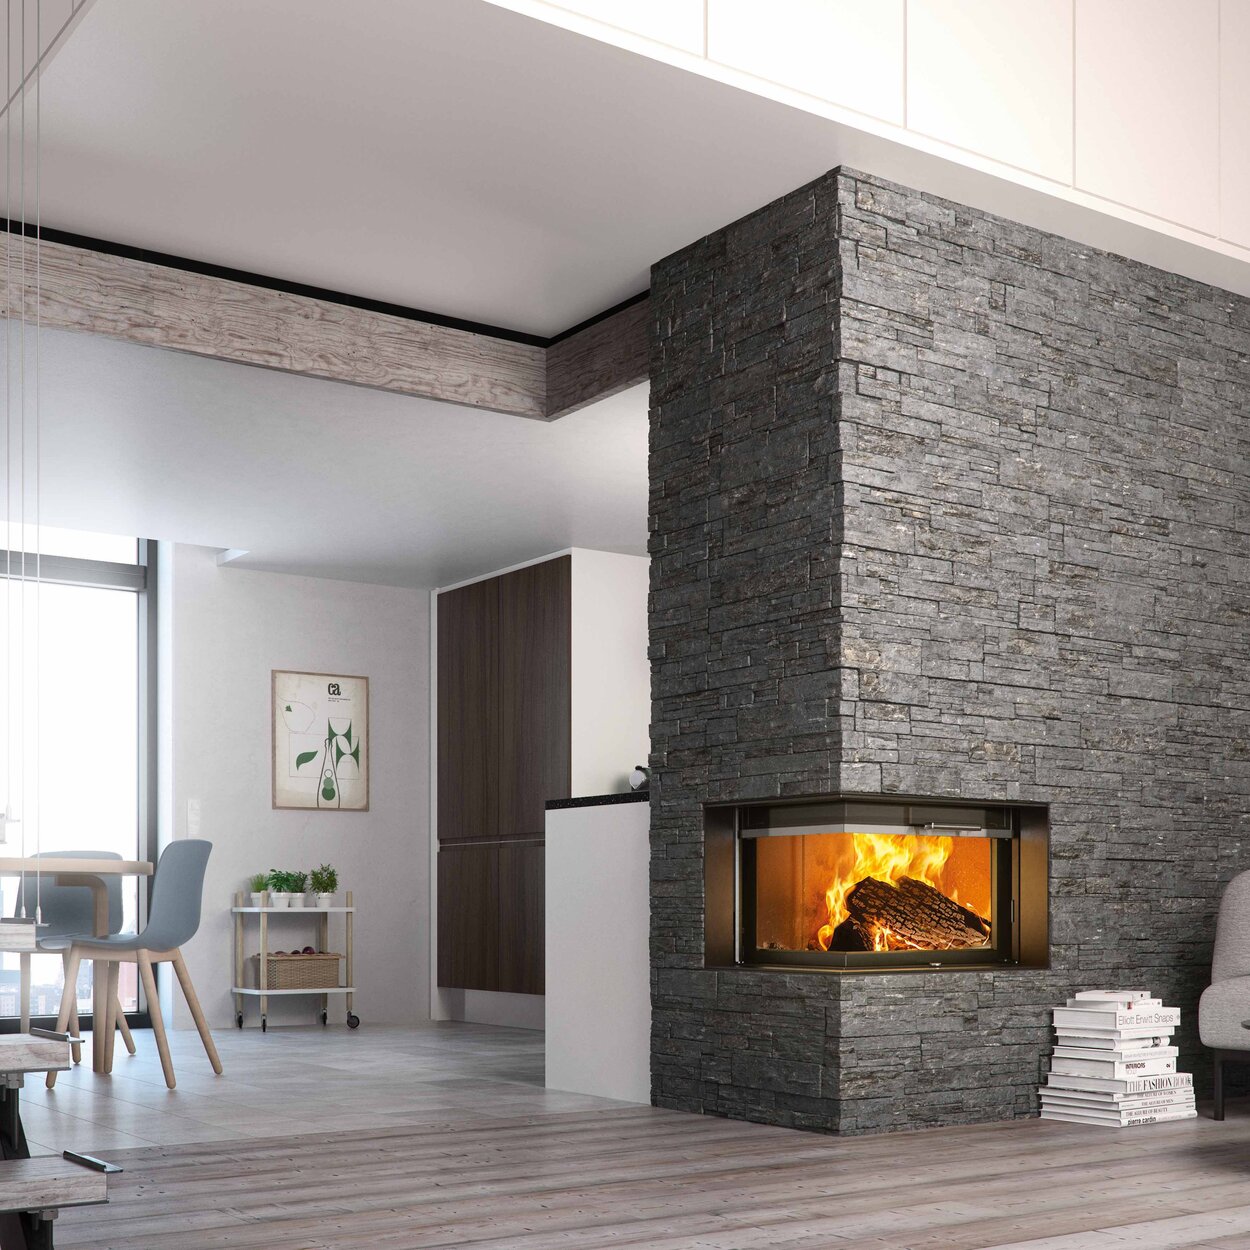 Wood fireplace VISIO 2 right, the corner fireplace separates the kitchen and living room and is set into a rustic stone wall